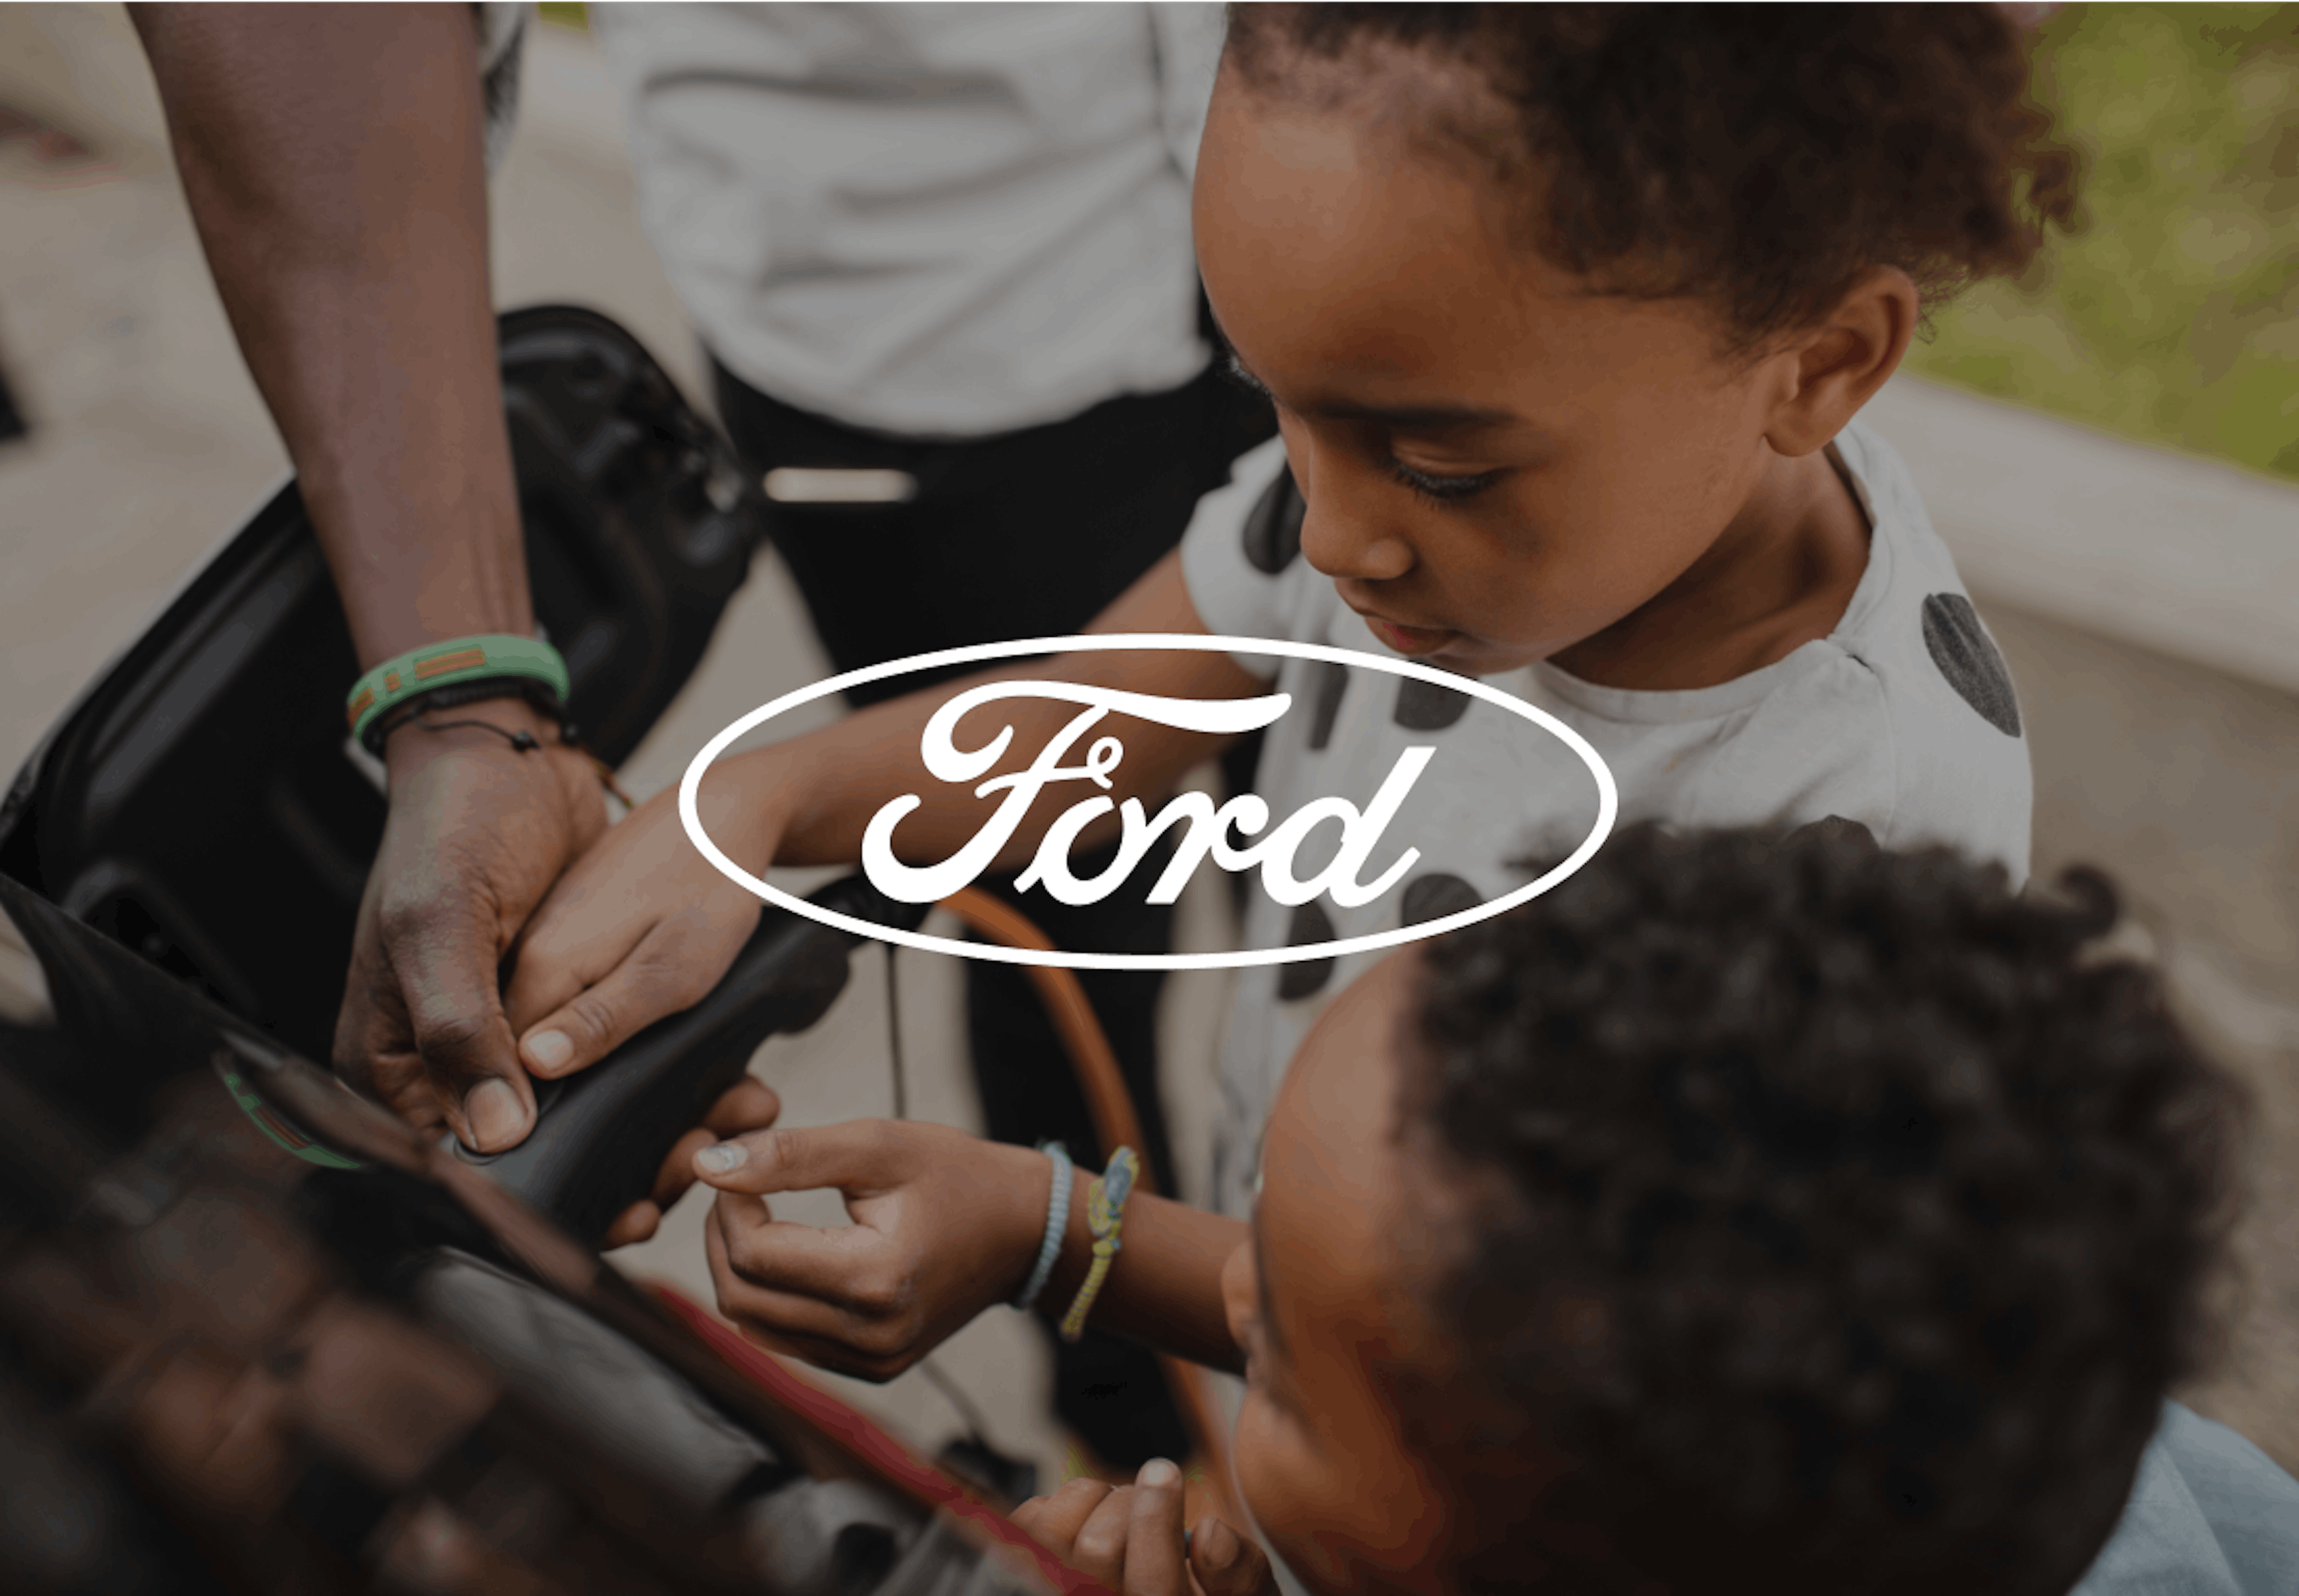 Close-up of children helping an adult charge an electric vehicle, Ford logo overlaid